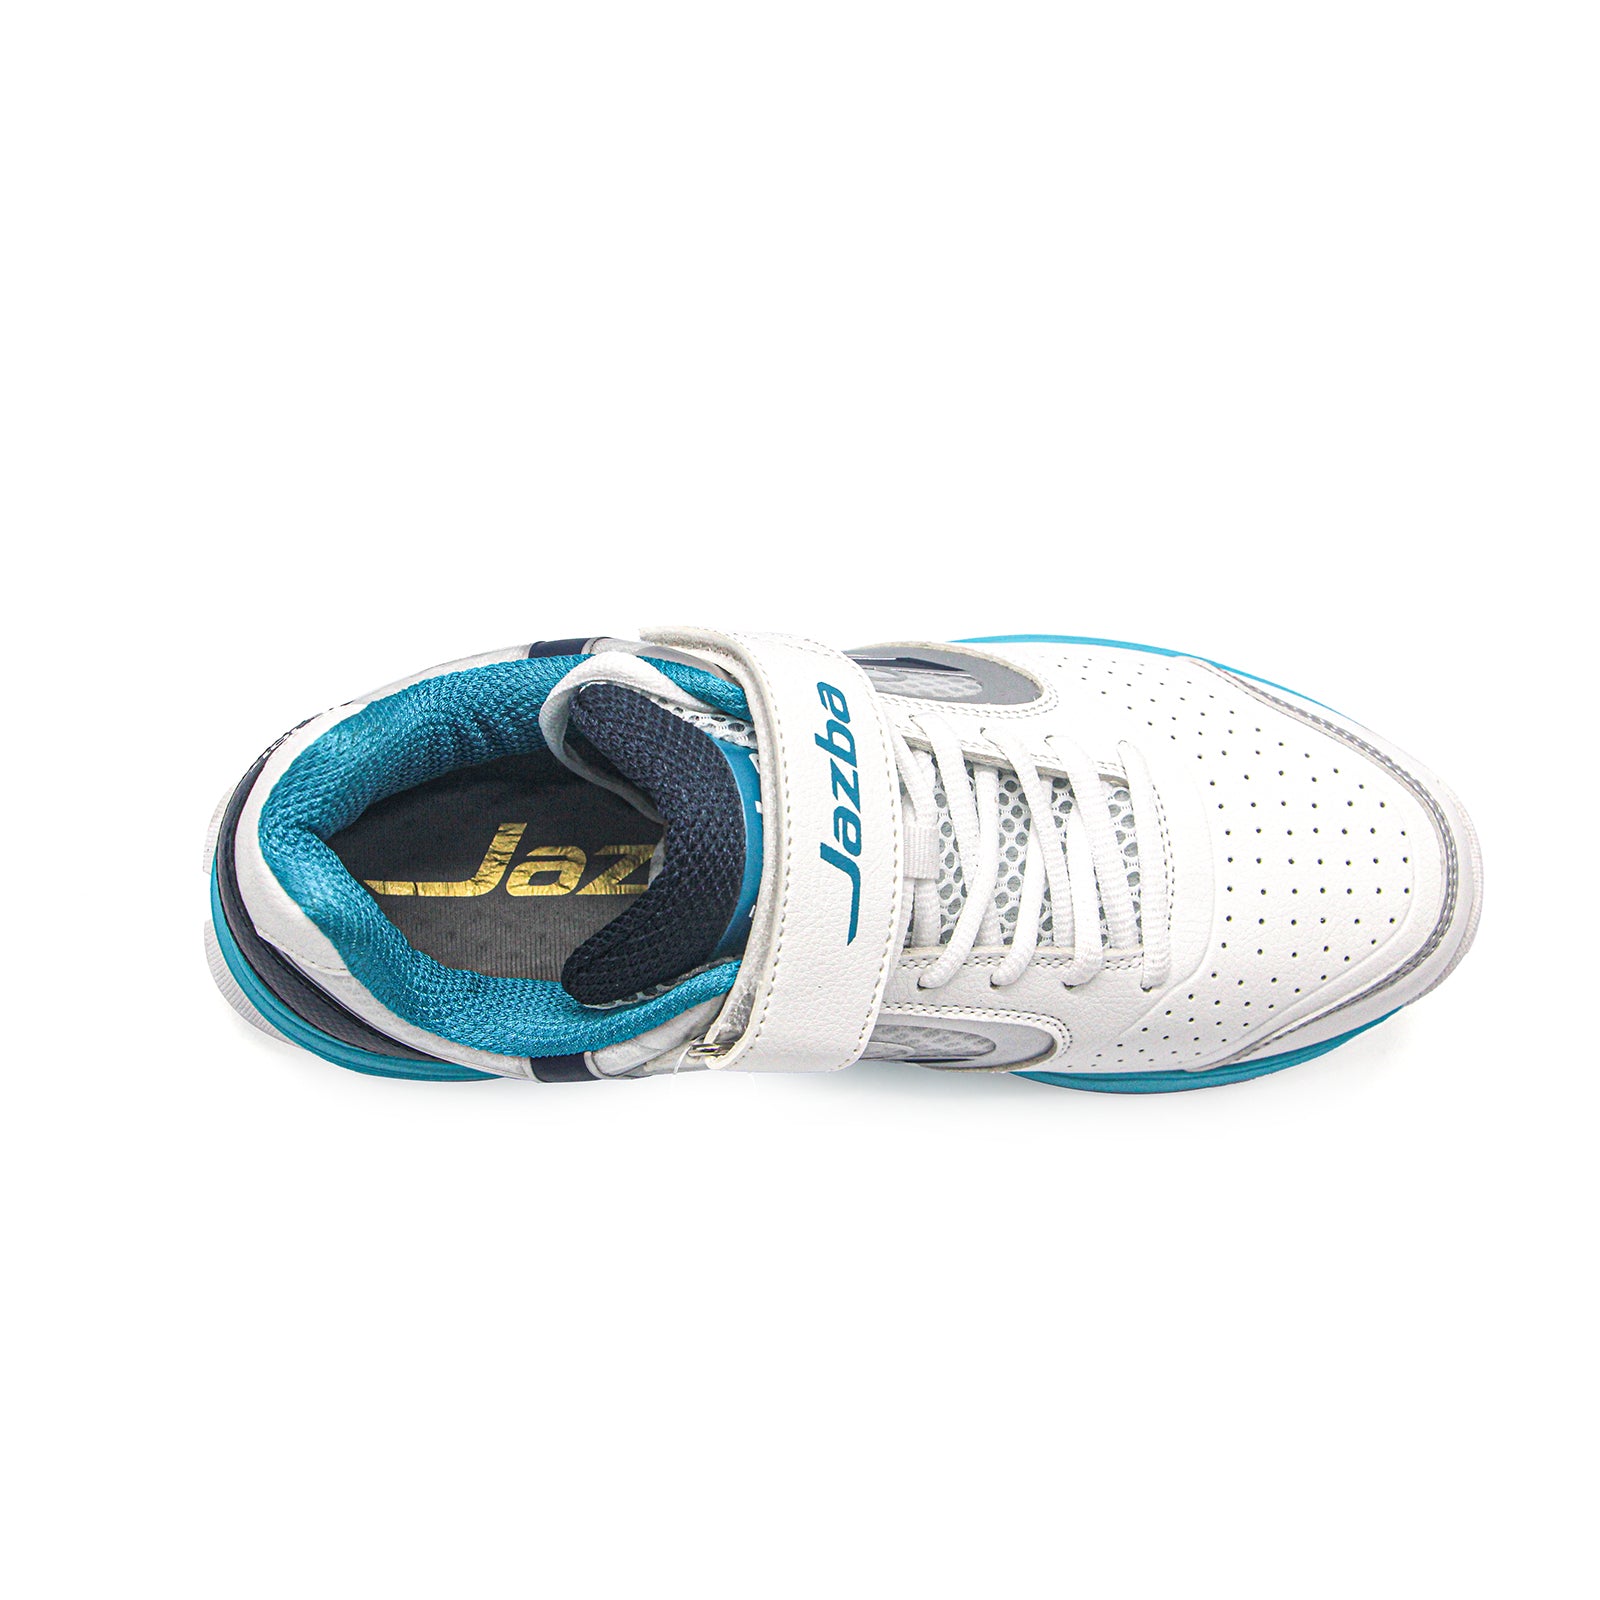 JAZBA RUBBER CRICKET SHOES SKY DRIVE 103- TEAL 2023